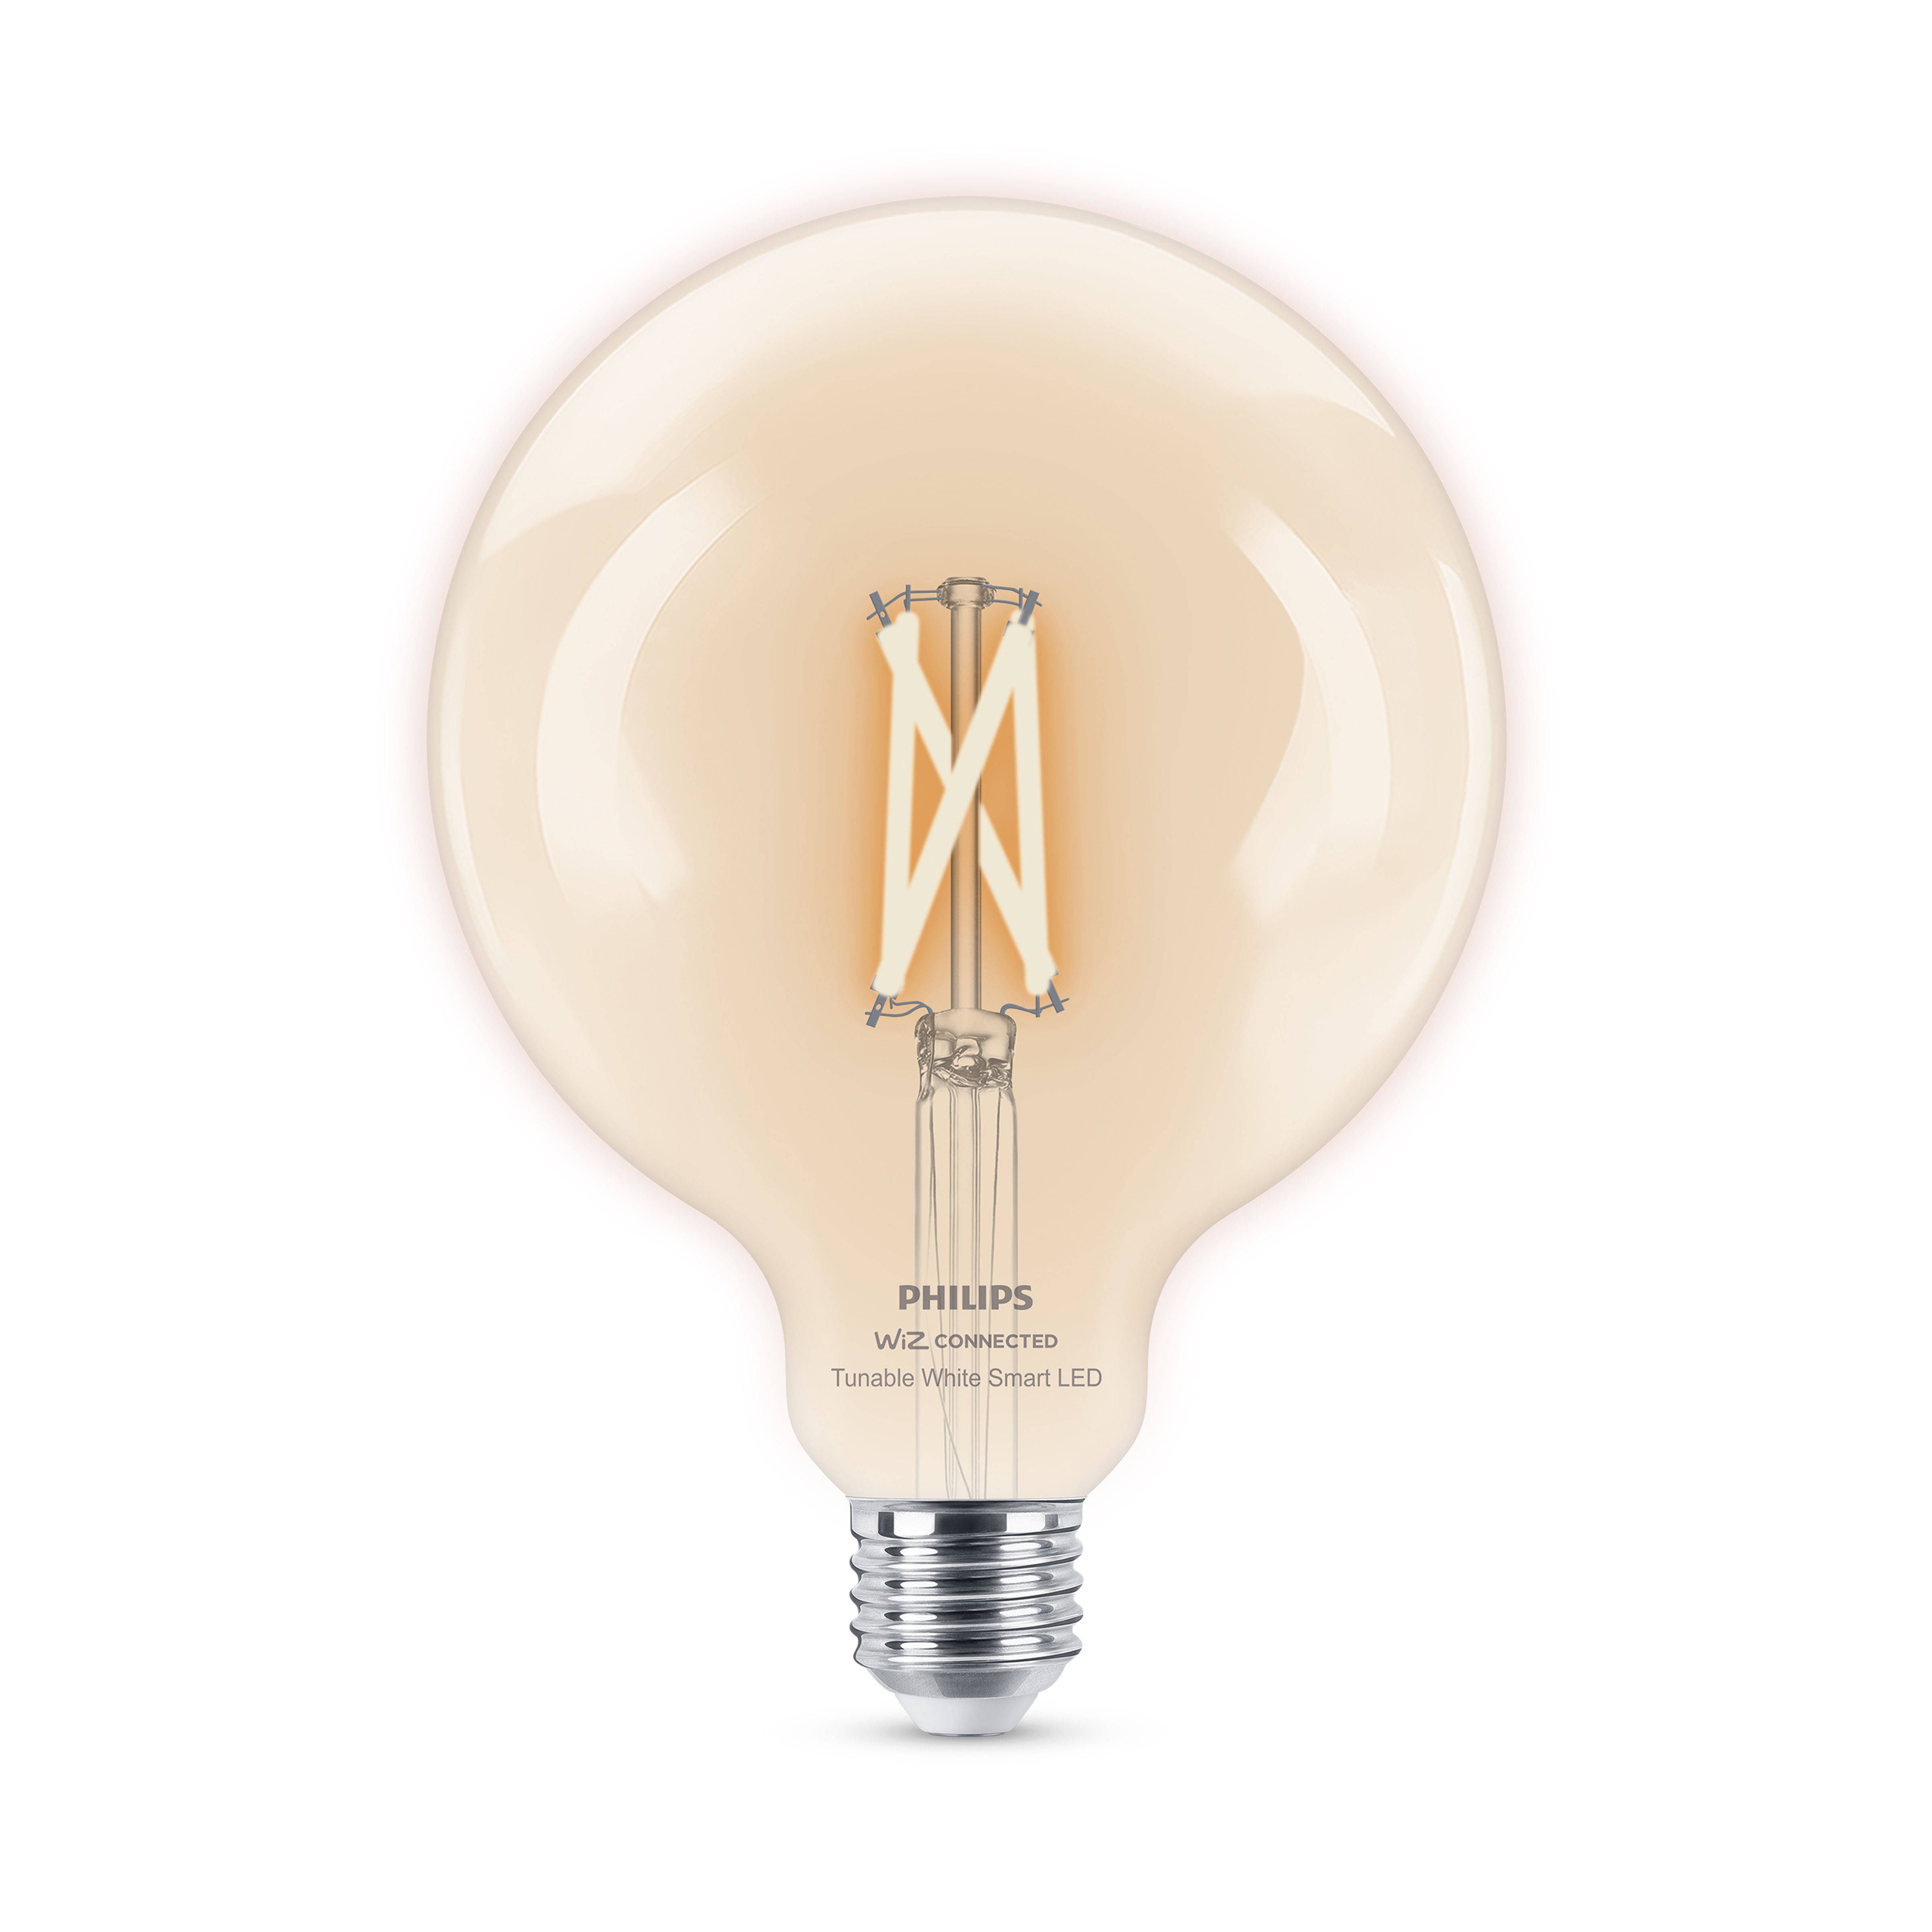 Philips LED Cool white & warm white Non-dimmable Light bulb